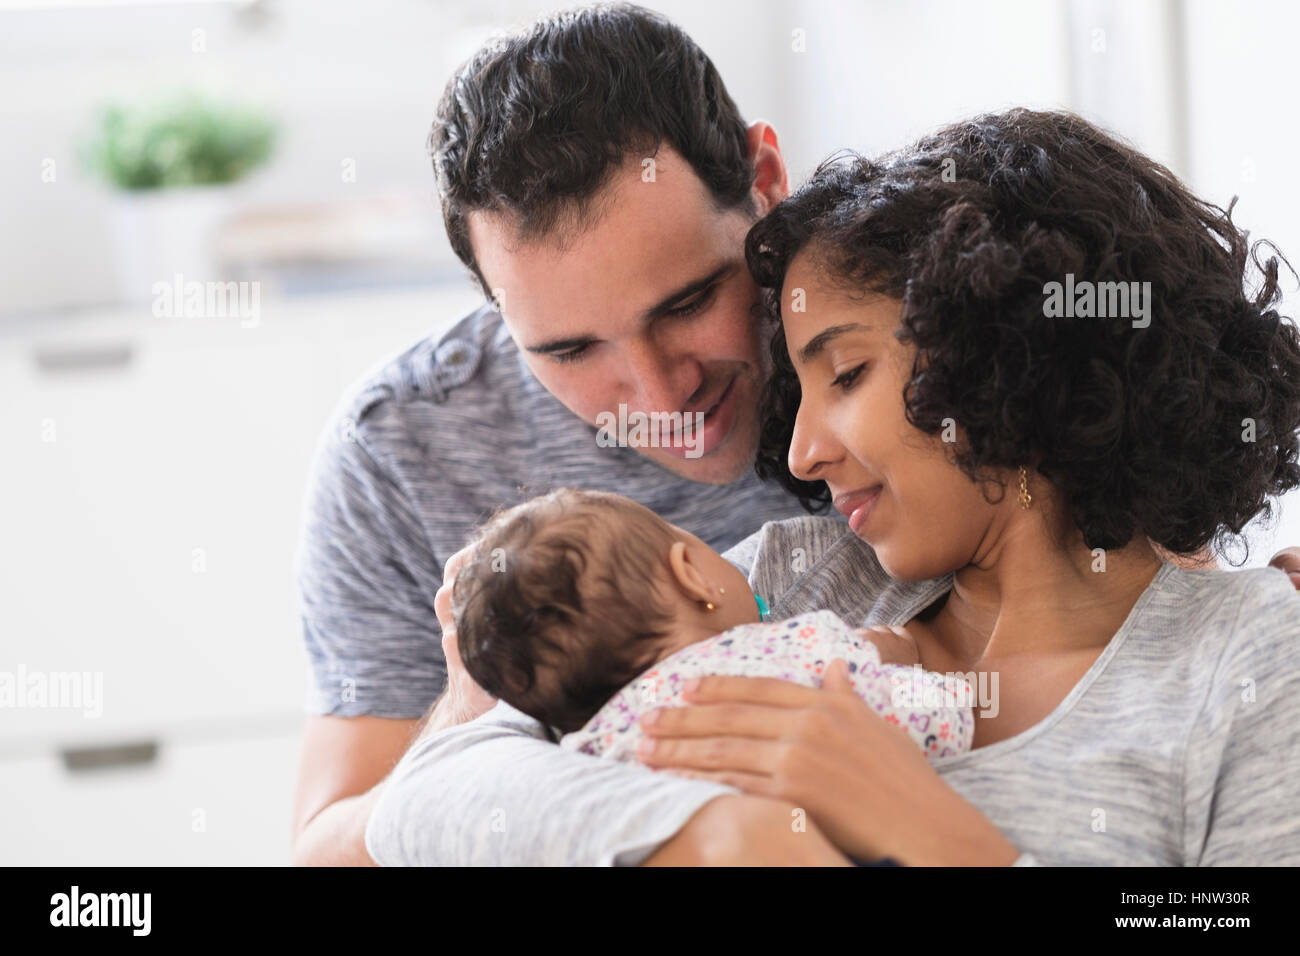 Hispanic mother and father admiring baby daughter Stock Photo